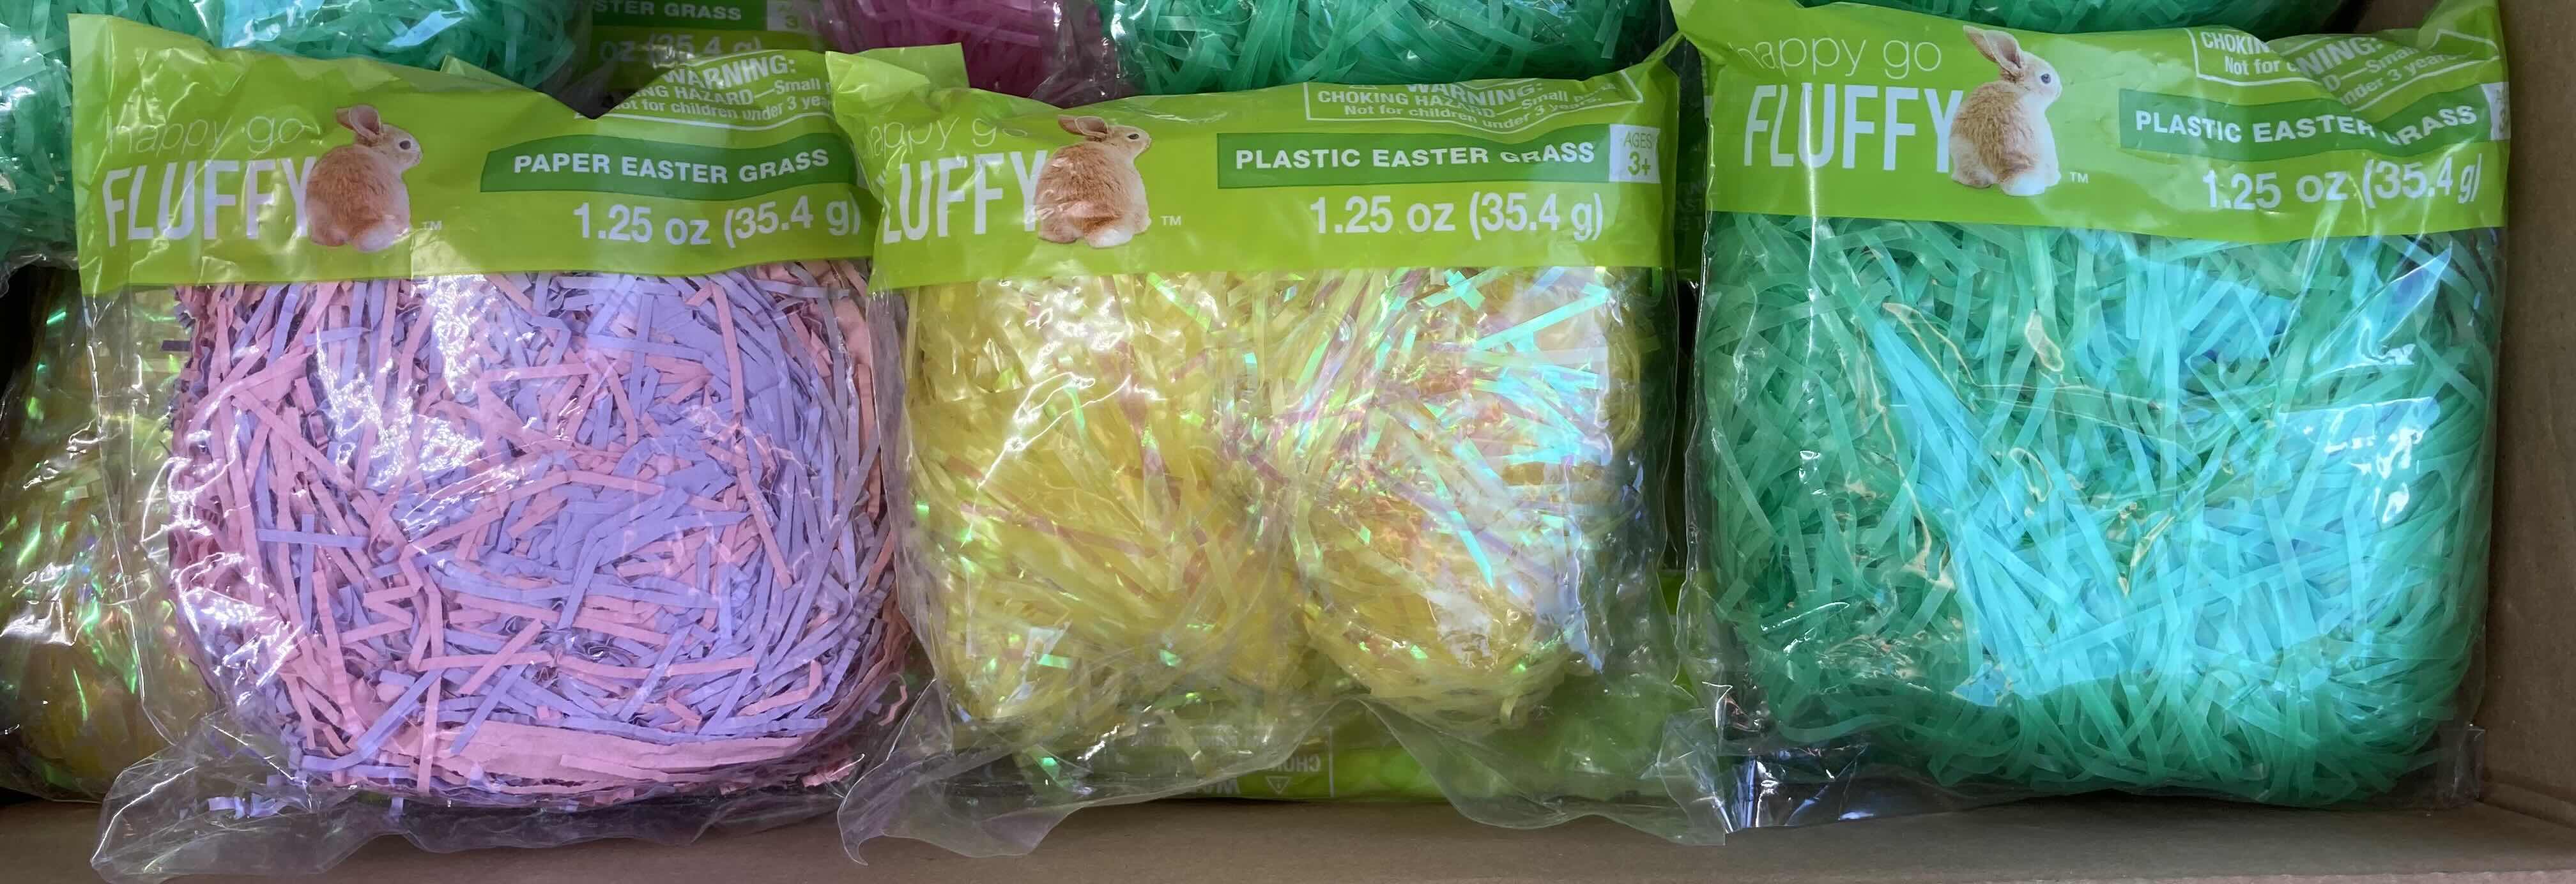 Photo 2 of NEW HAPPY GO FLUFFY PAPER EASTER GRASS 1.25OZ BAGS (APPROX 40 BAGS PER CASE)